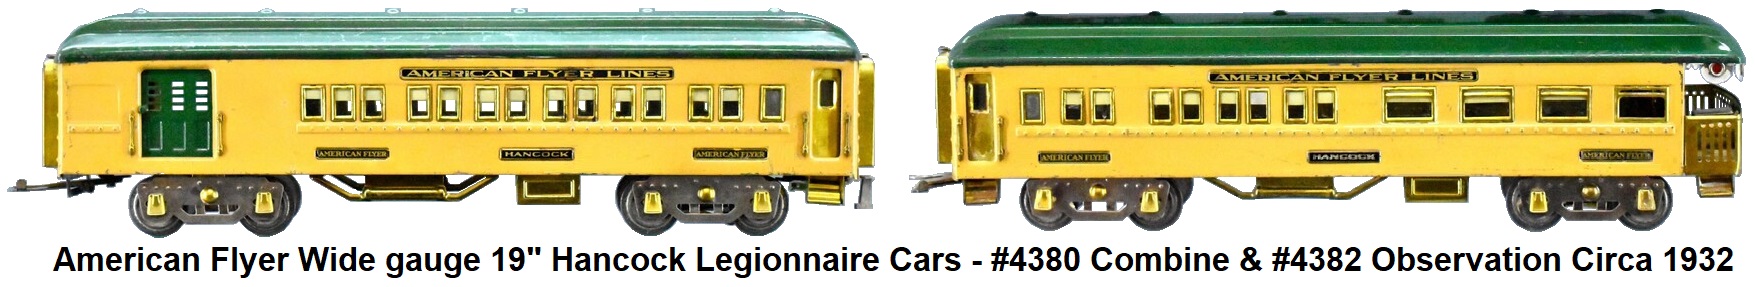 American Flyer Wide gauge Legionaire Set 19 inch President's special Hancock cars - #4380 combine and #4382 observation circa 1932